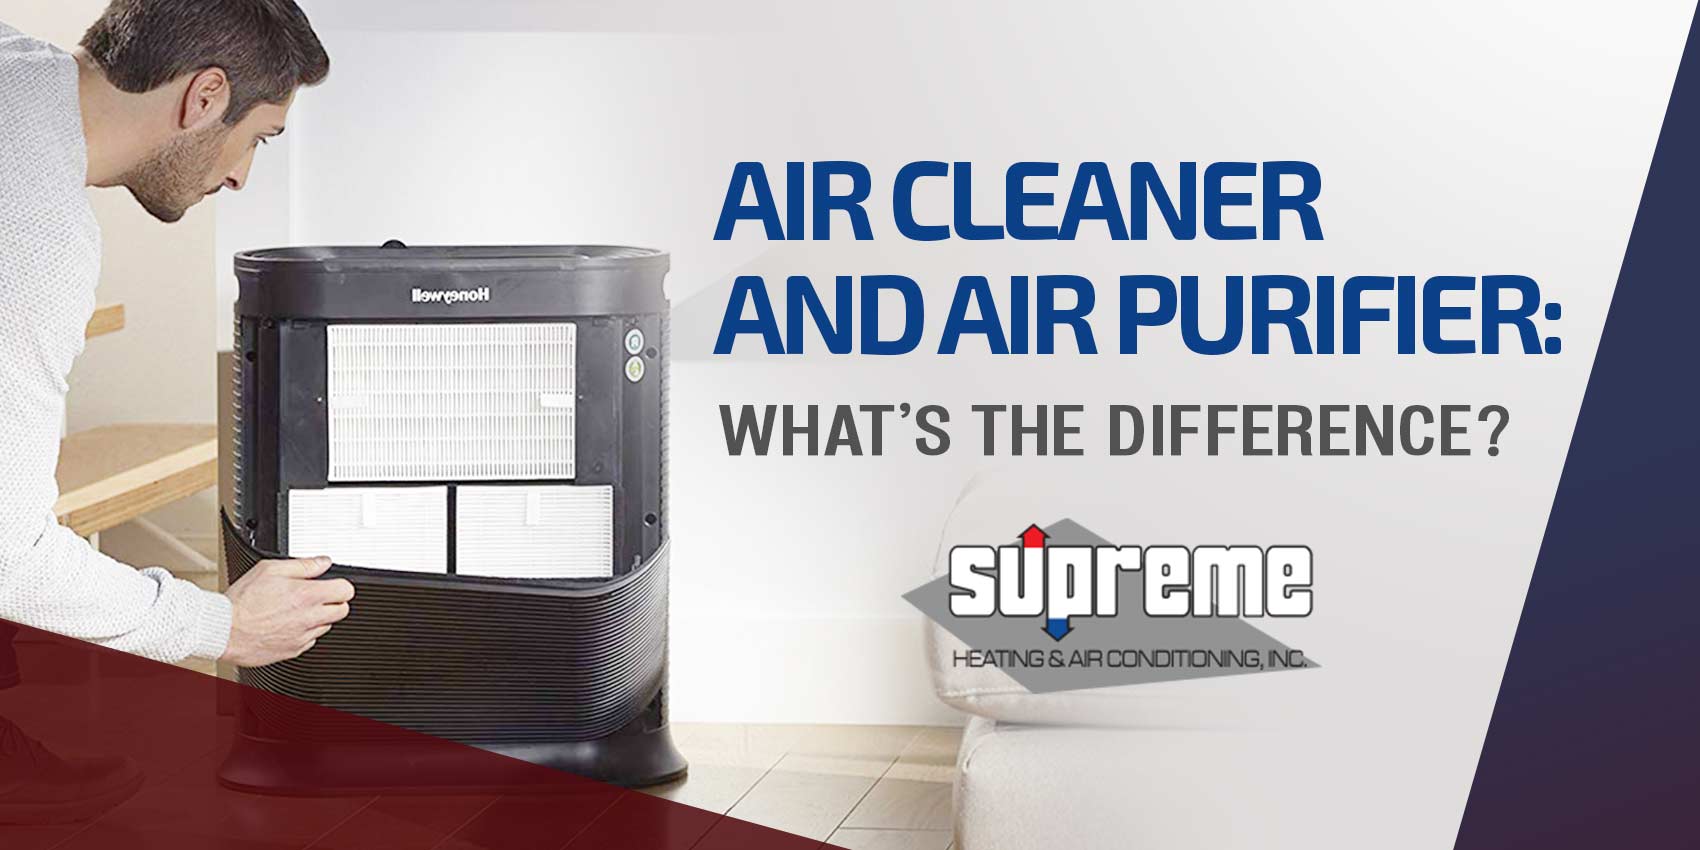 Air Cleaner and Air Purifier: What’s The Difference?